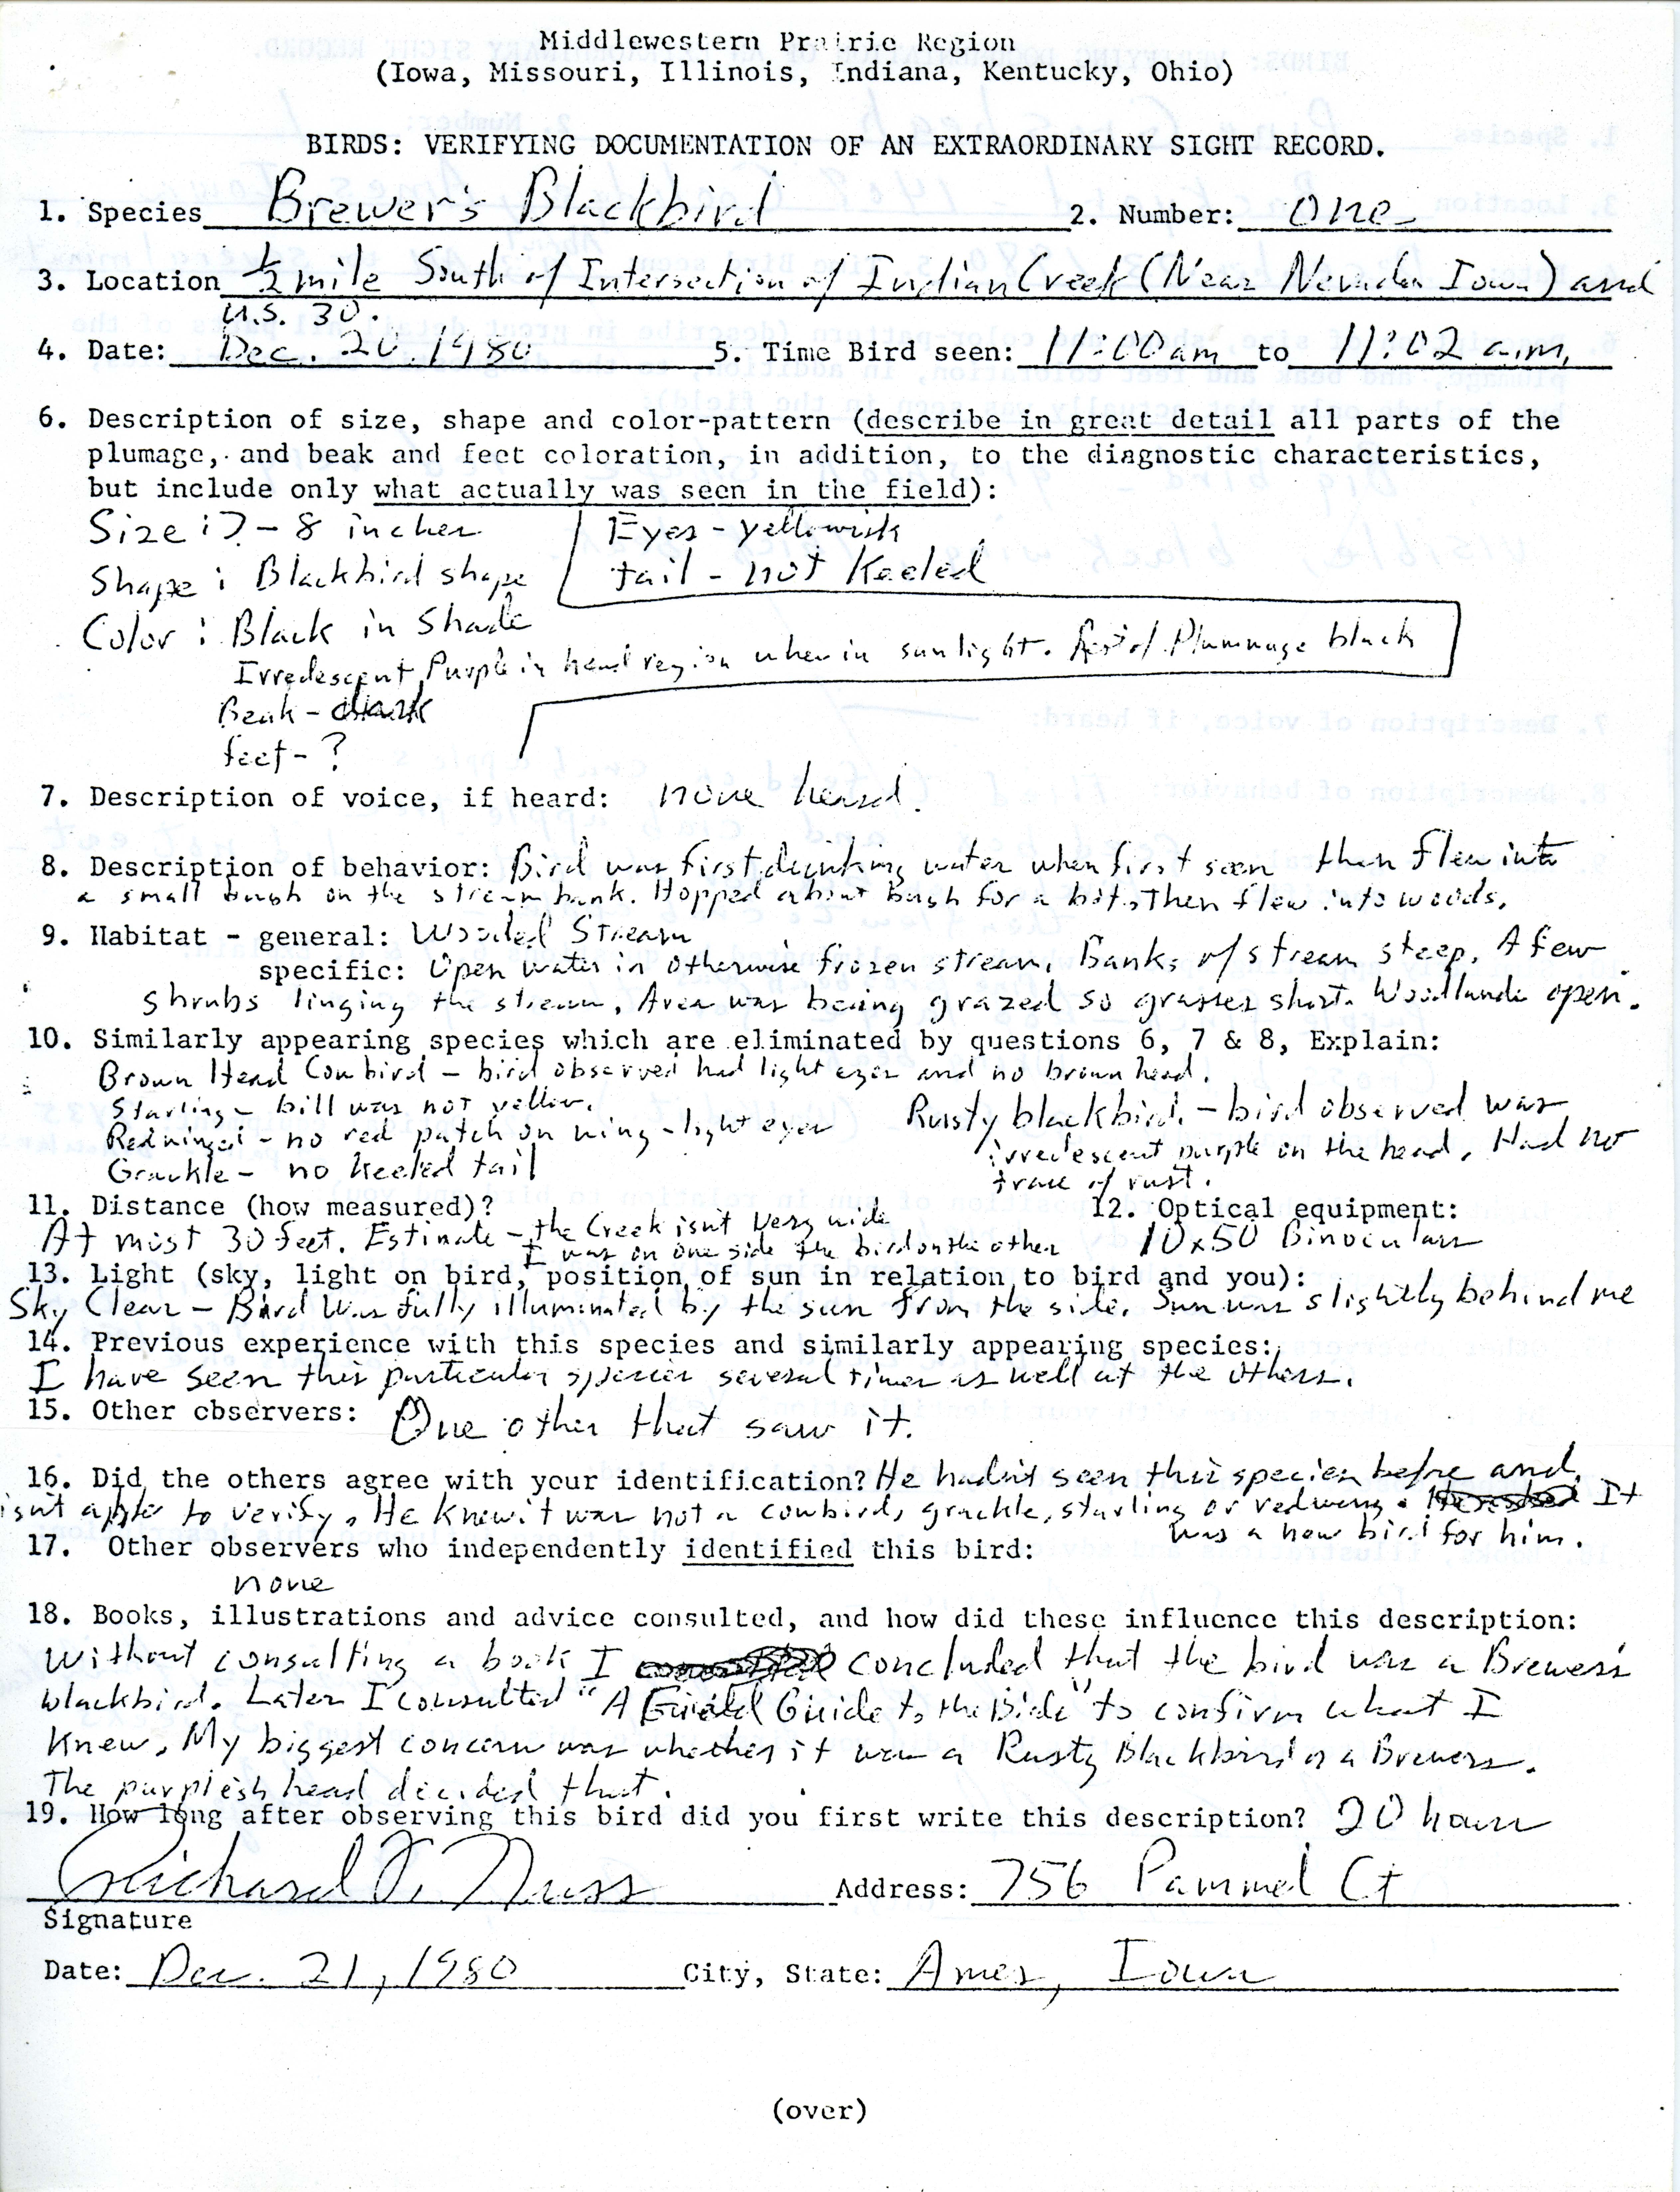 Verifying documentation form for Brewer's Blackbird sighting submitted by Richard Nuss, December 20 1980